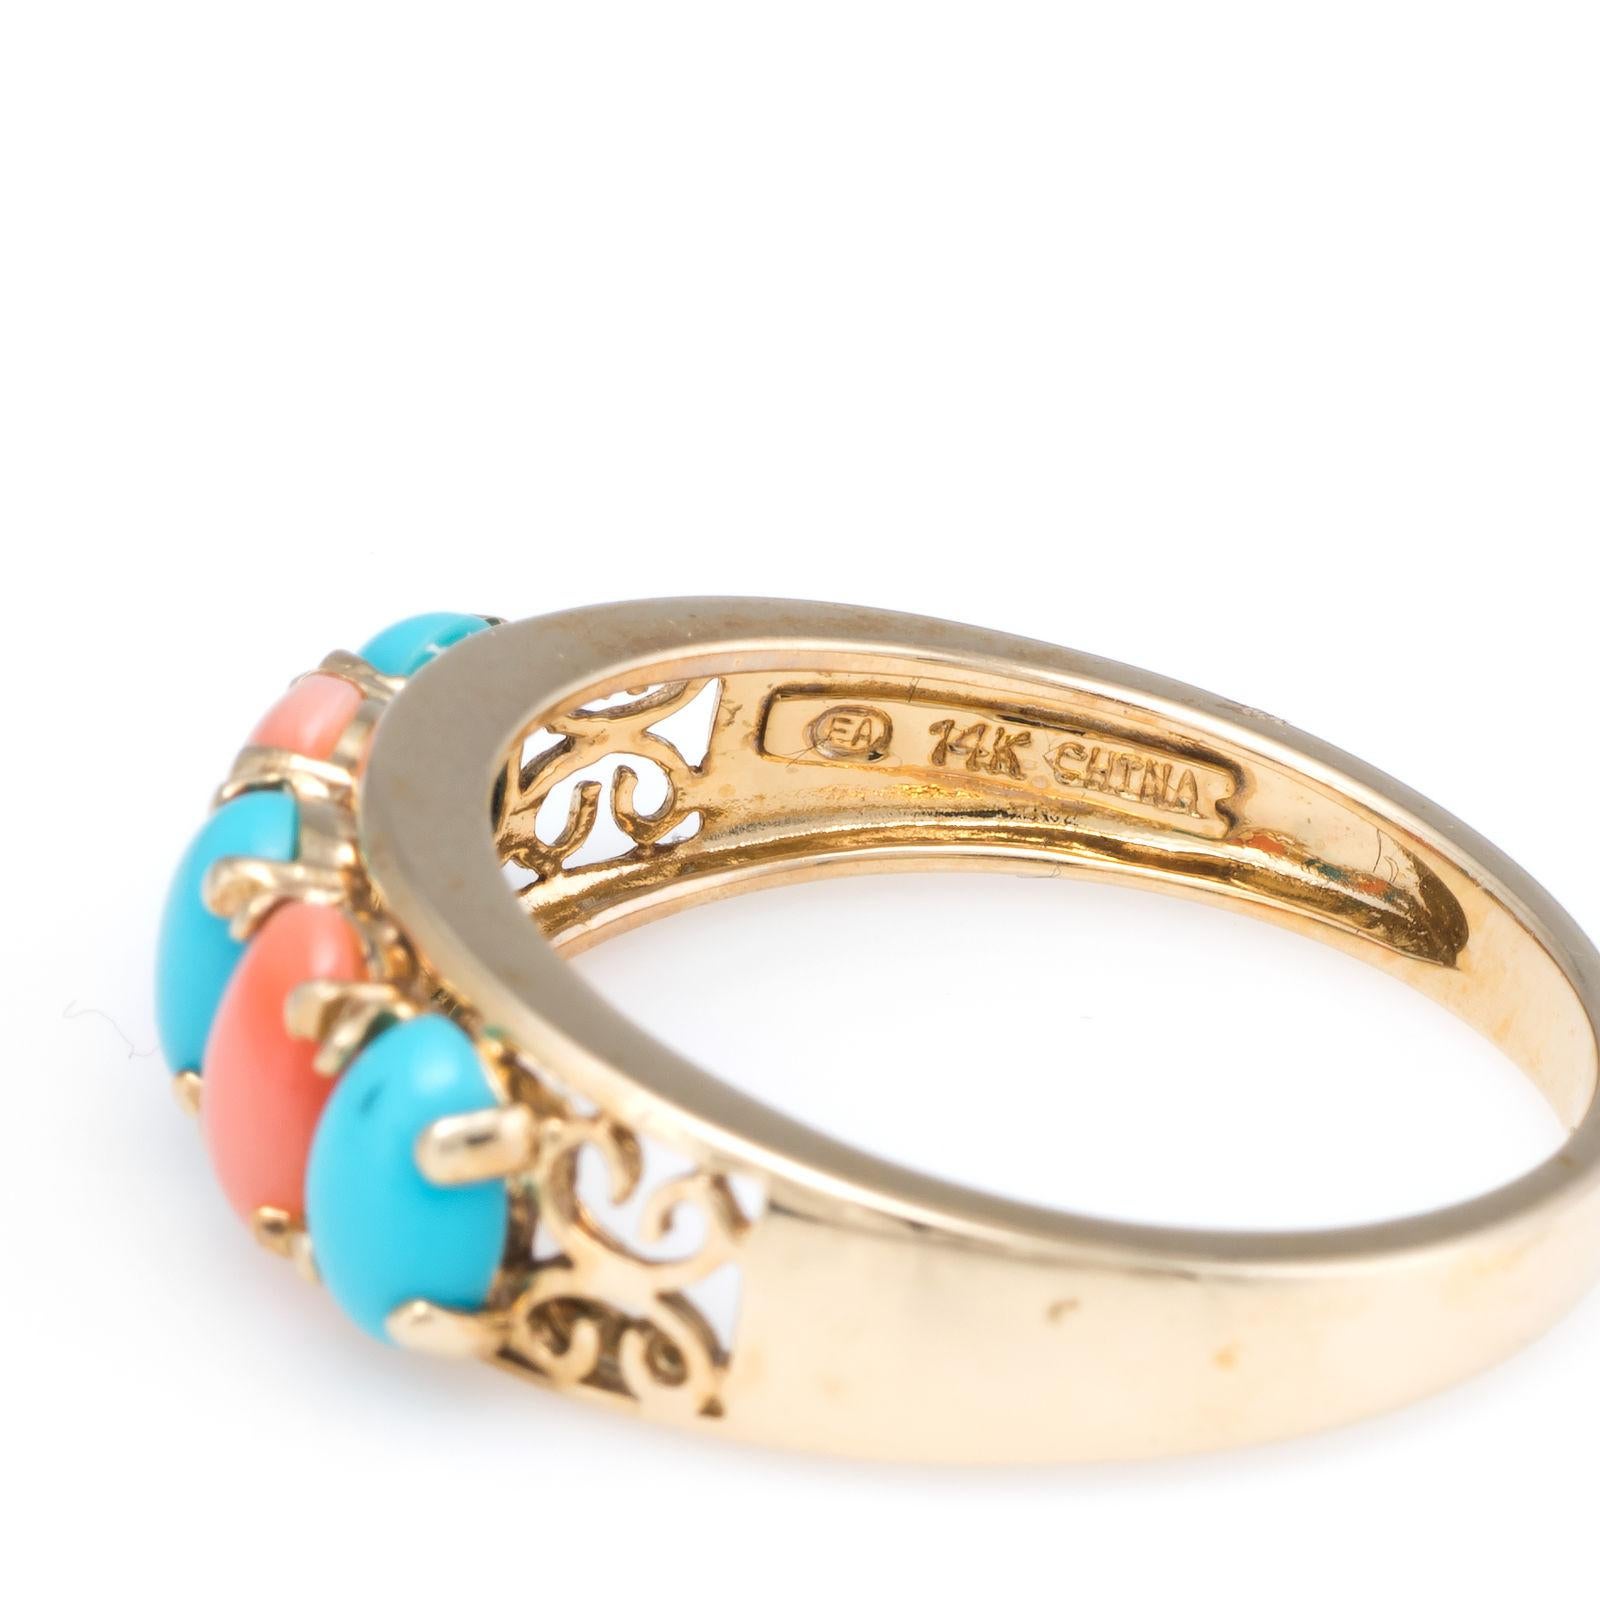 Women's Vintage Turquoise Coral Ring 14 Karat Yellow Gold Estate Fine Jewelry Band